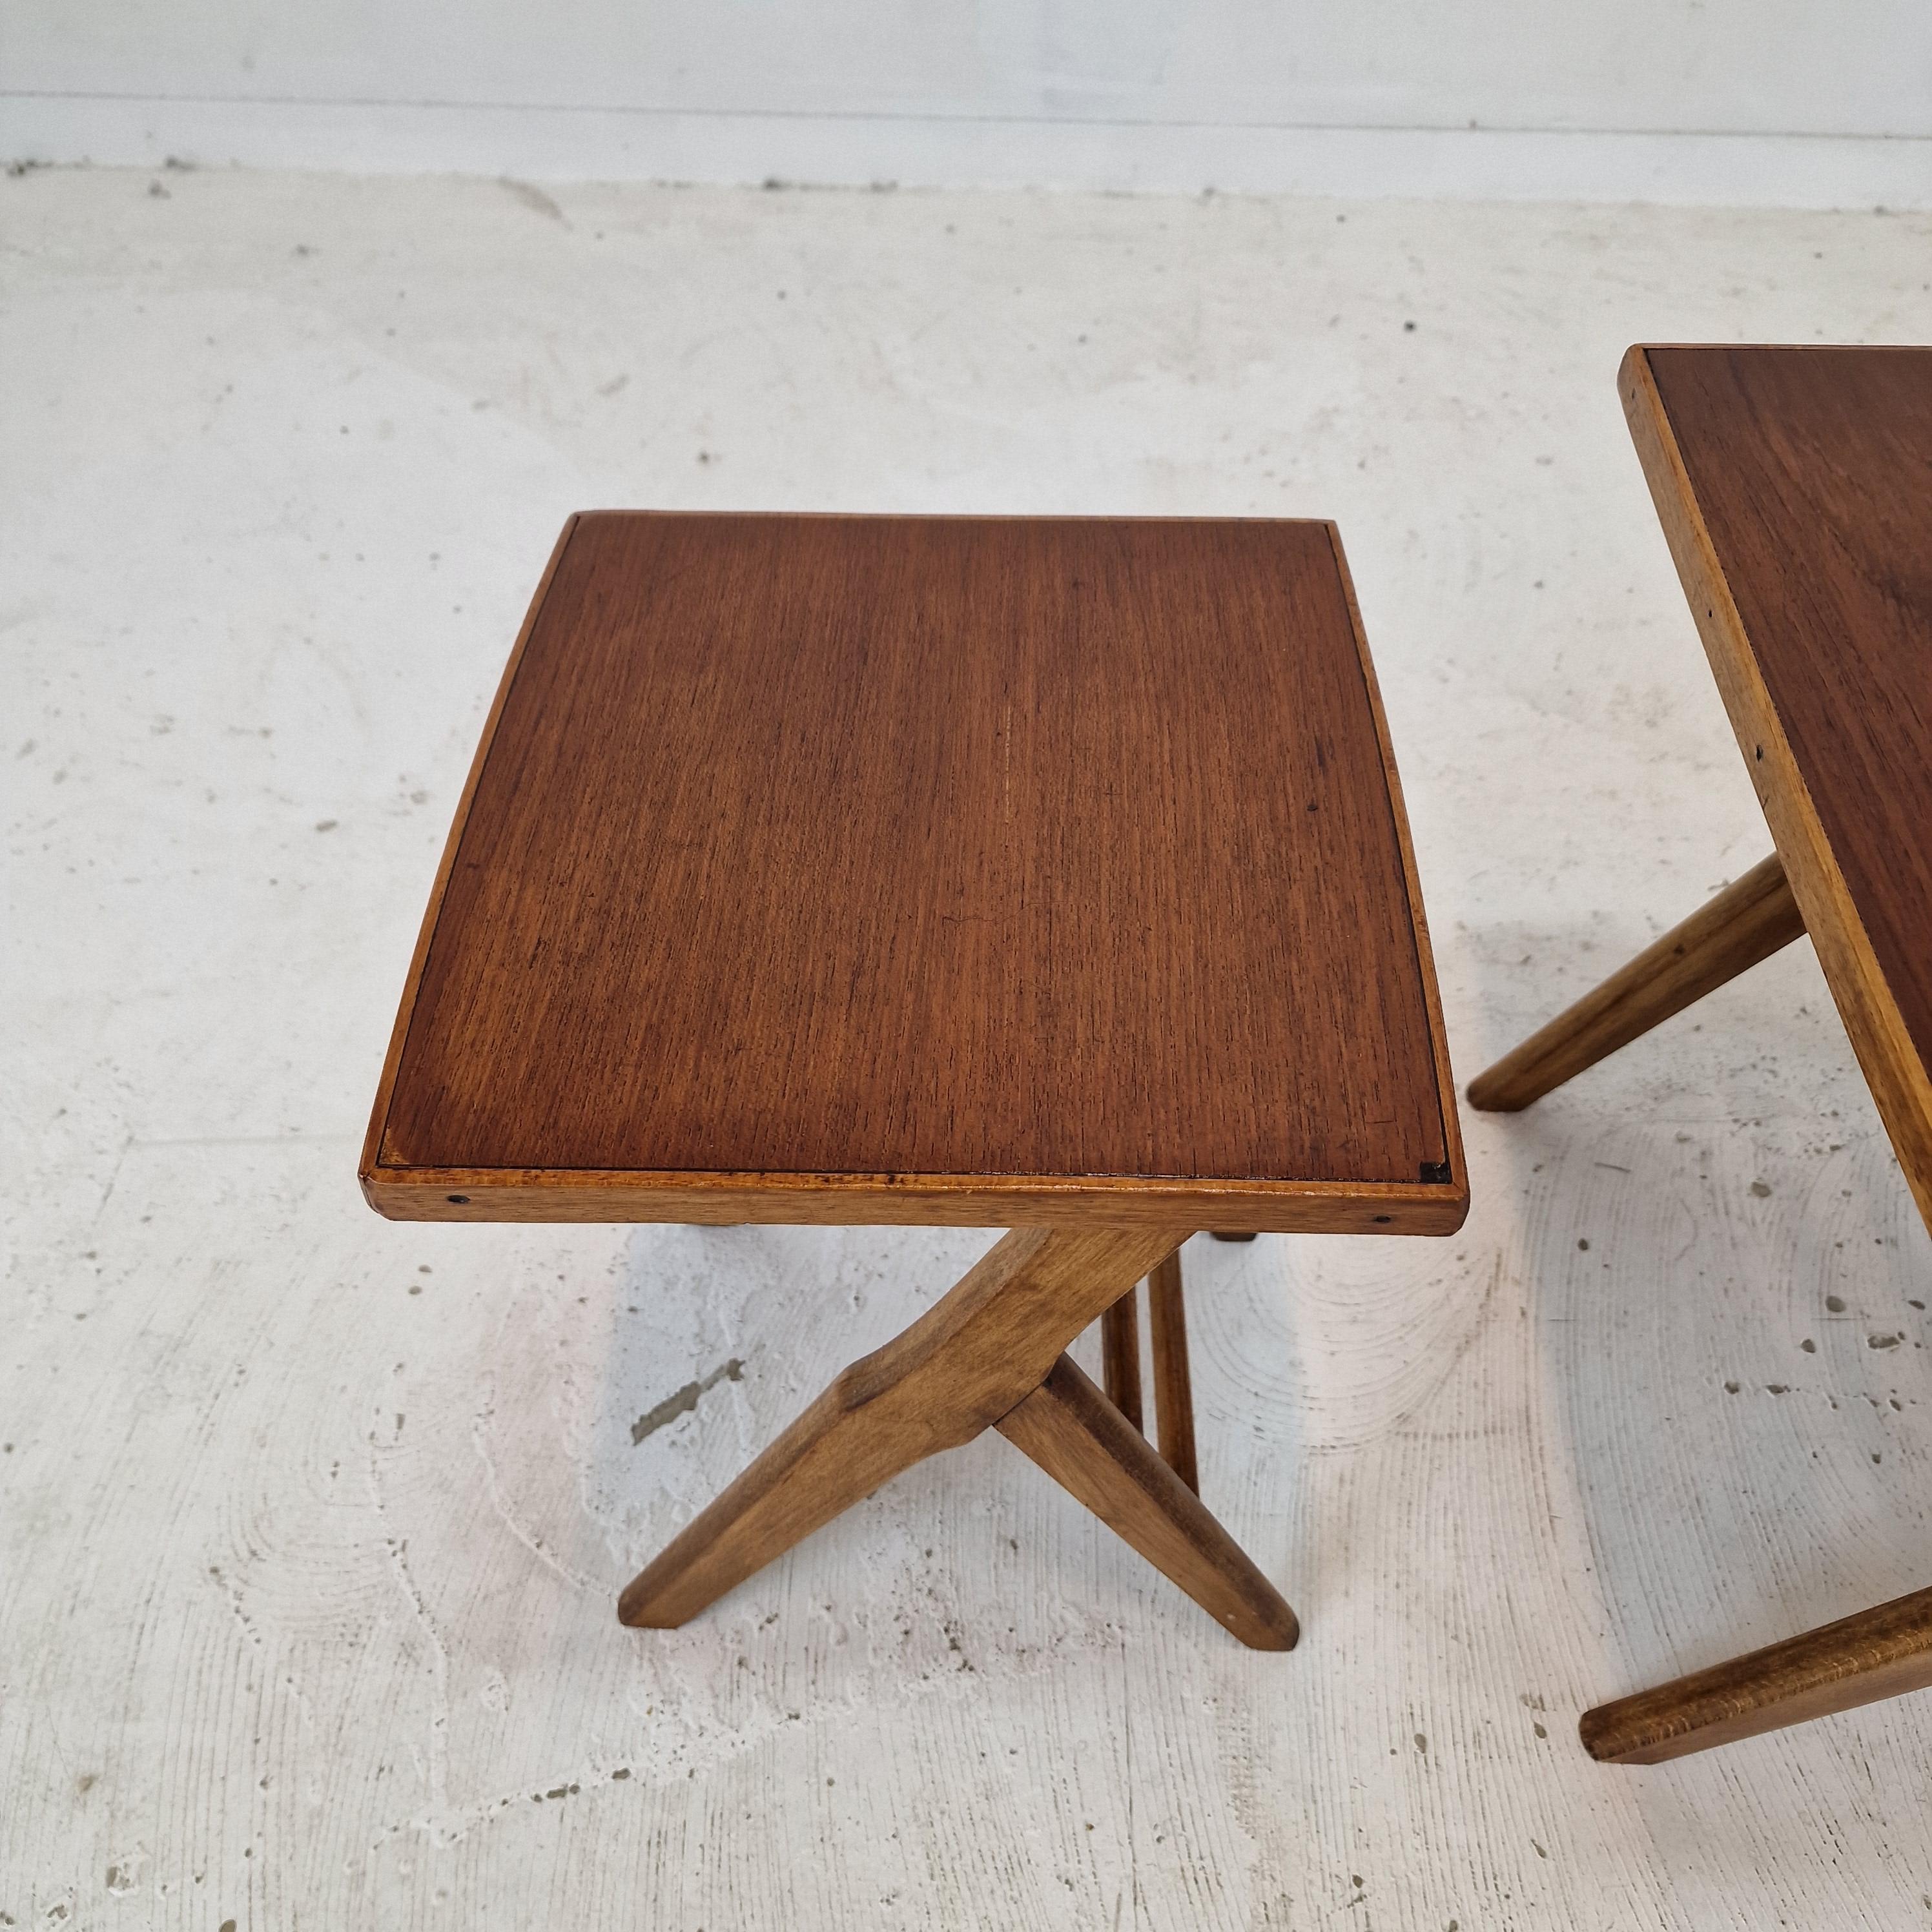 Set of 3 Wooden Nesting Tables, Holland 1960s For Sale 4